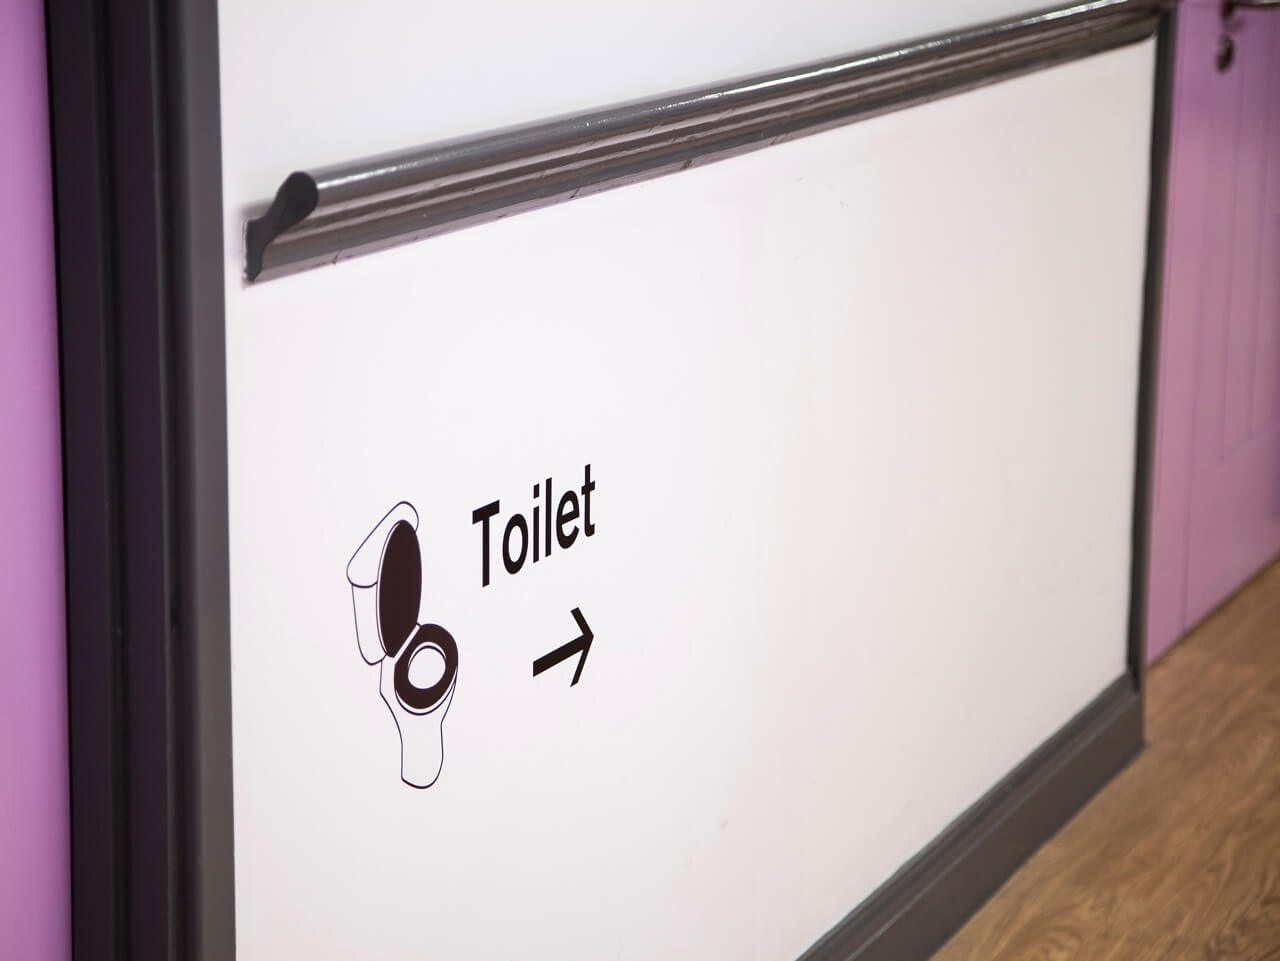 Dementia friendly signage for toilets at Haven Court with pictogram and directional arrow